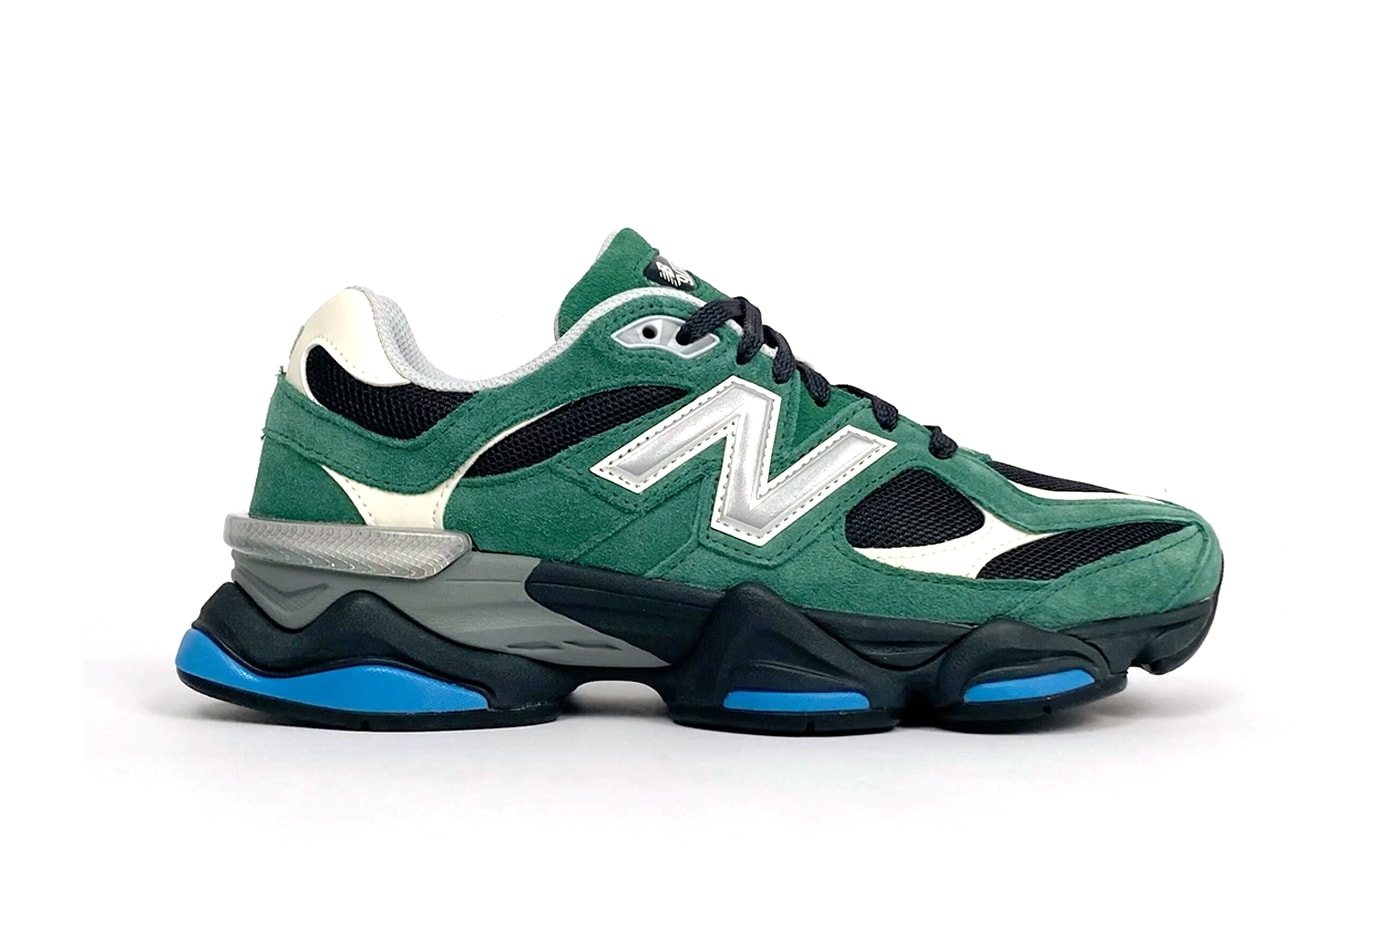 New Balance 90 60 pine green silver cream suede abzorb sbs release info date price